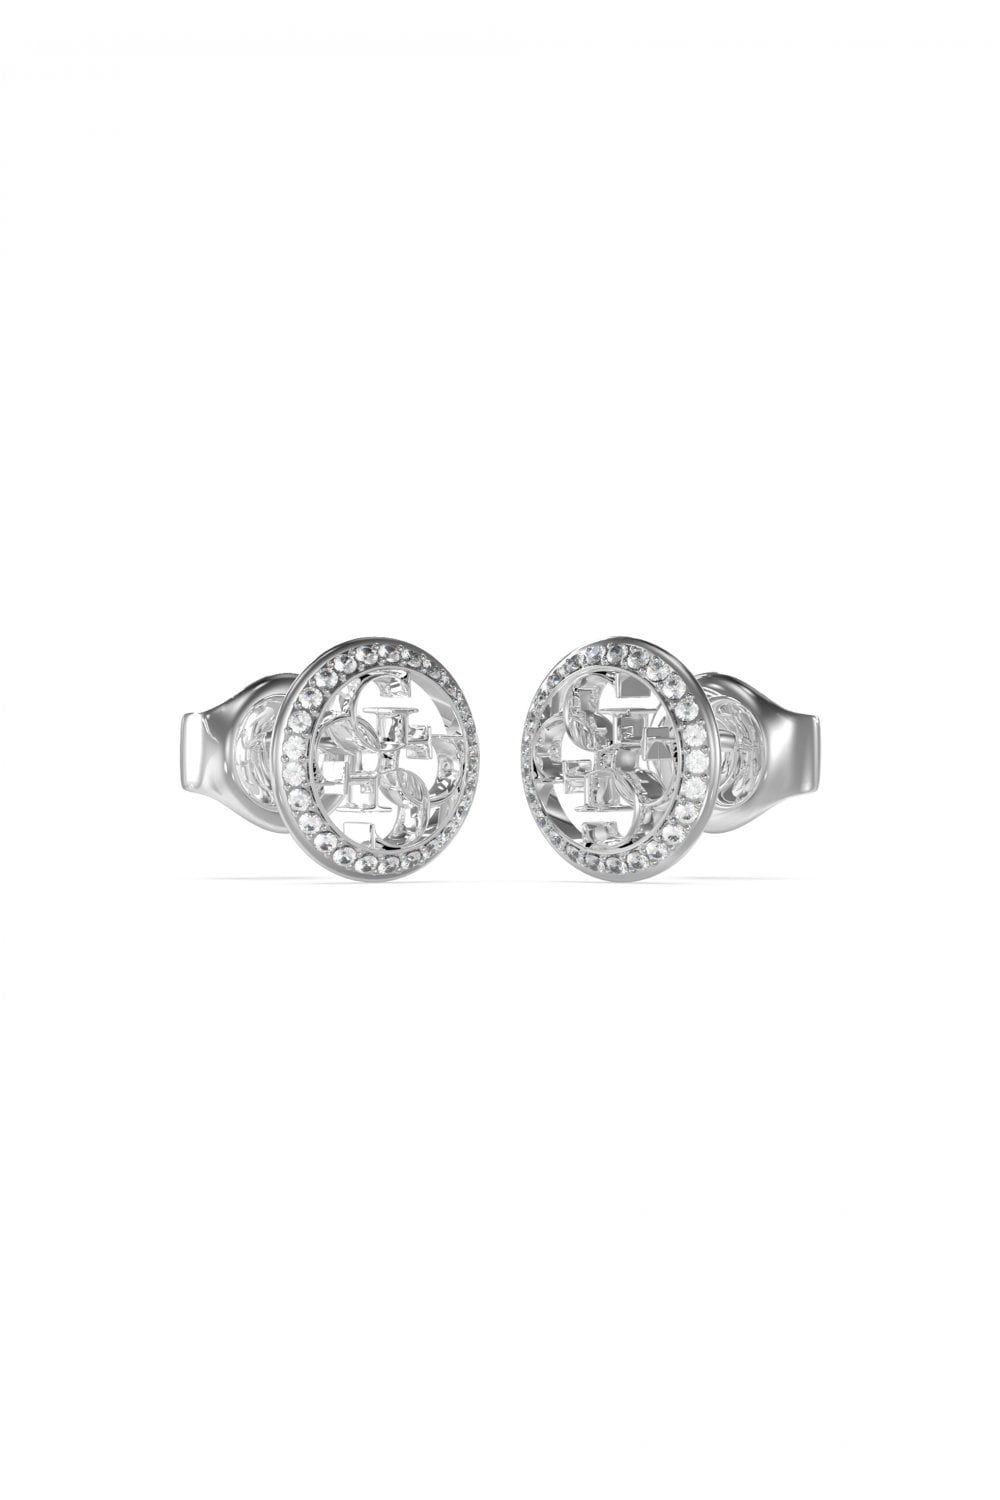 Guess Silver Tone 4G Studs